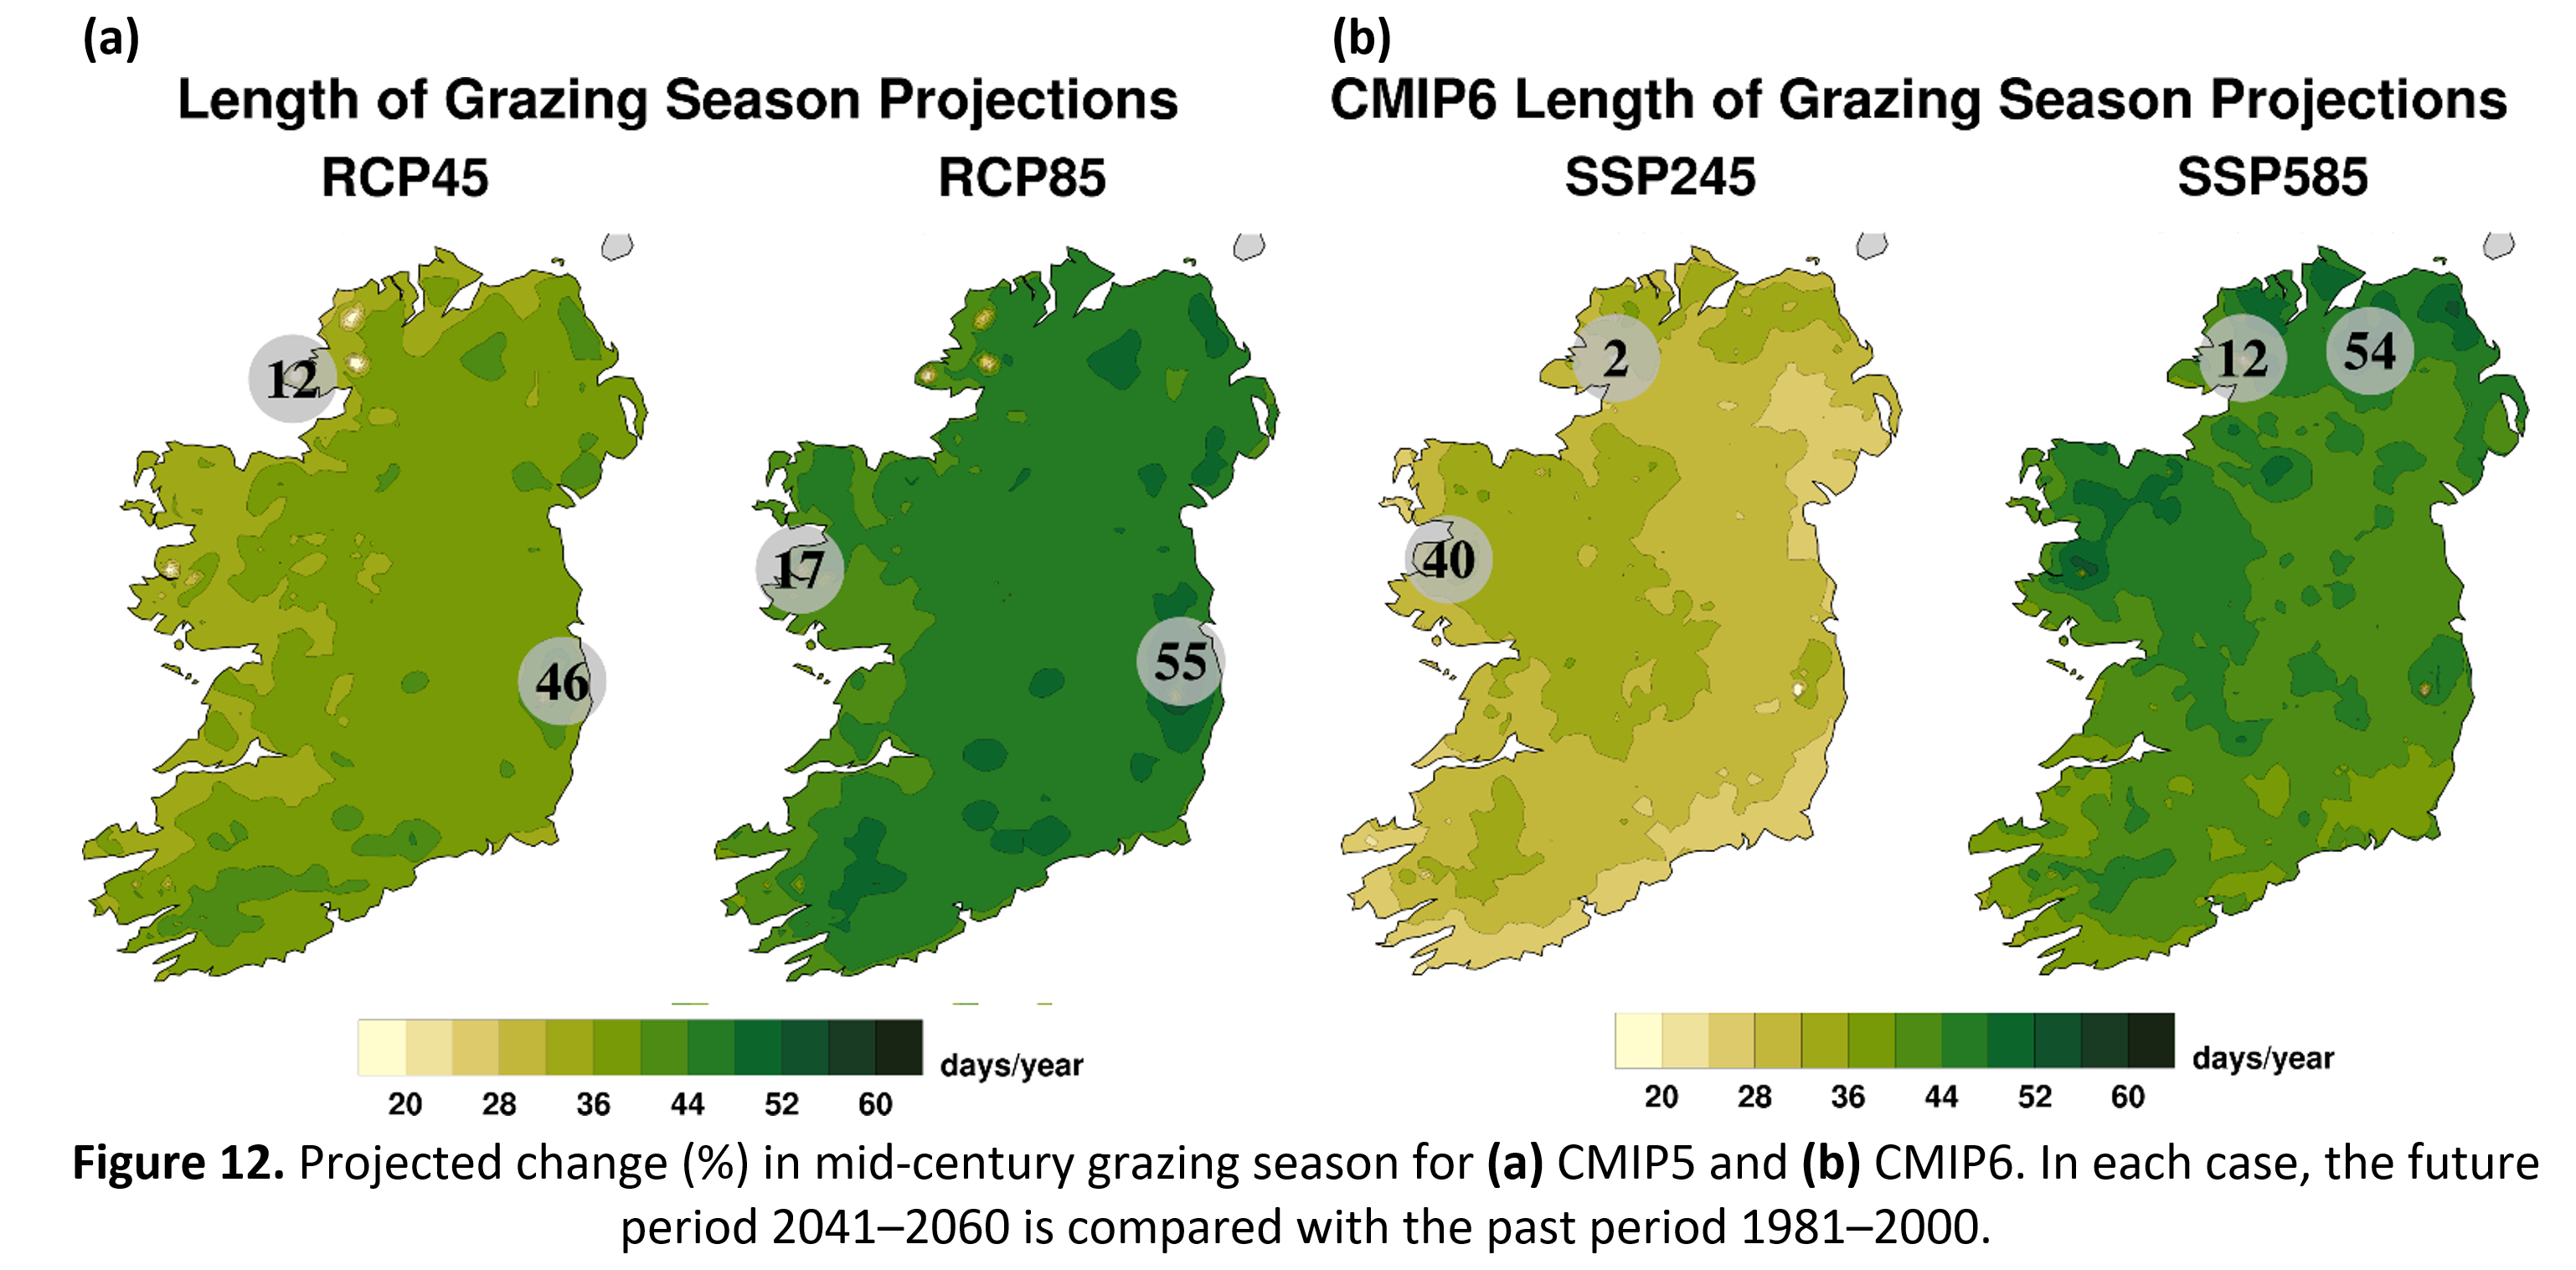 Figure 12. Projected change (%) in mid-century grazing season for (a) CMIP5 and (b) CMIP6. In each case, the future period 2041–2060 is compared with the past period 1981–2000.